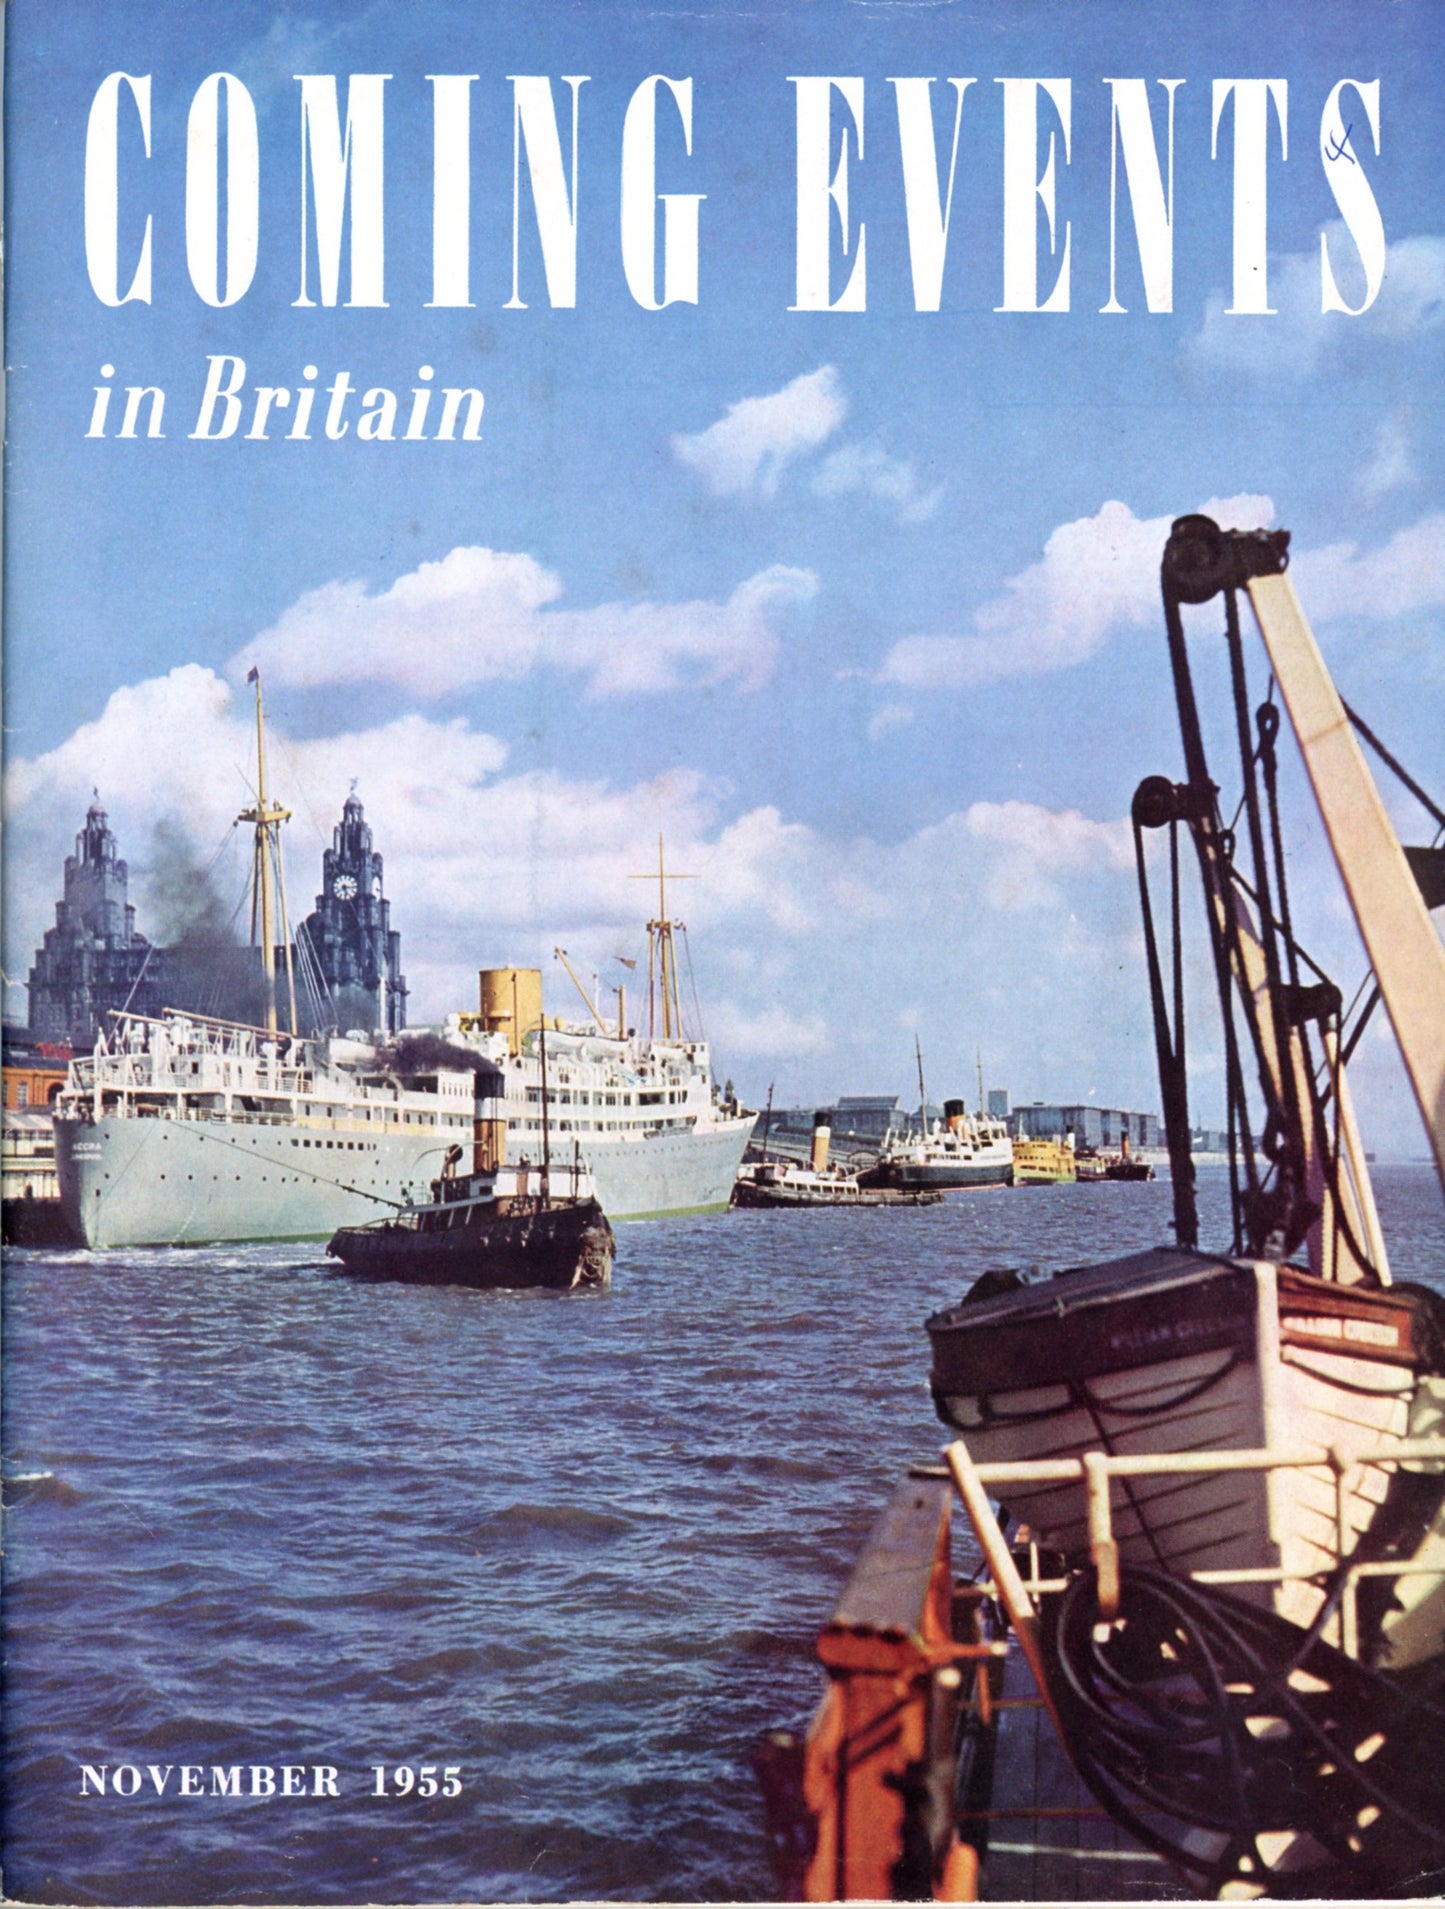 COMING EVENTS IN BRITAIN Vintage Travel Magazine © November 1955